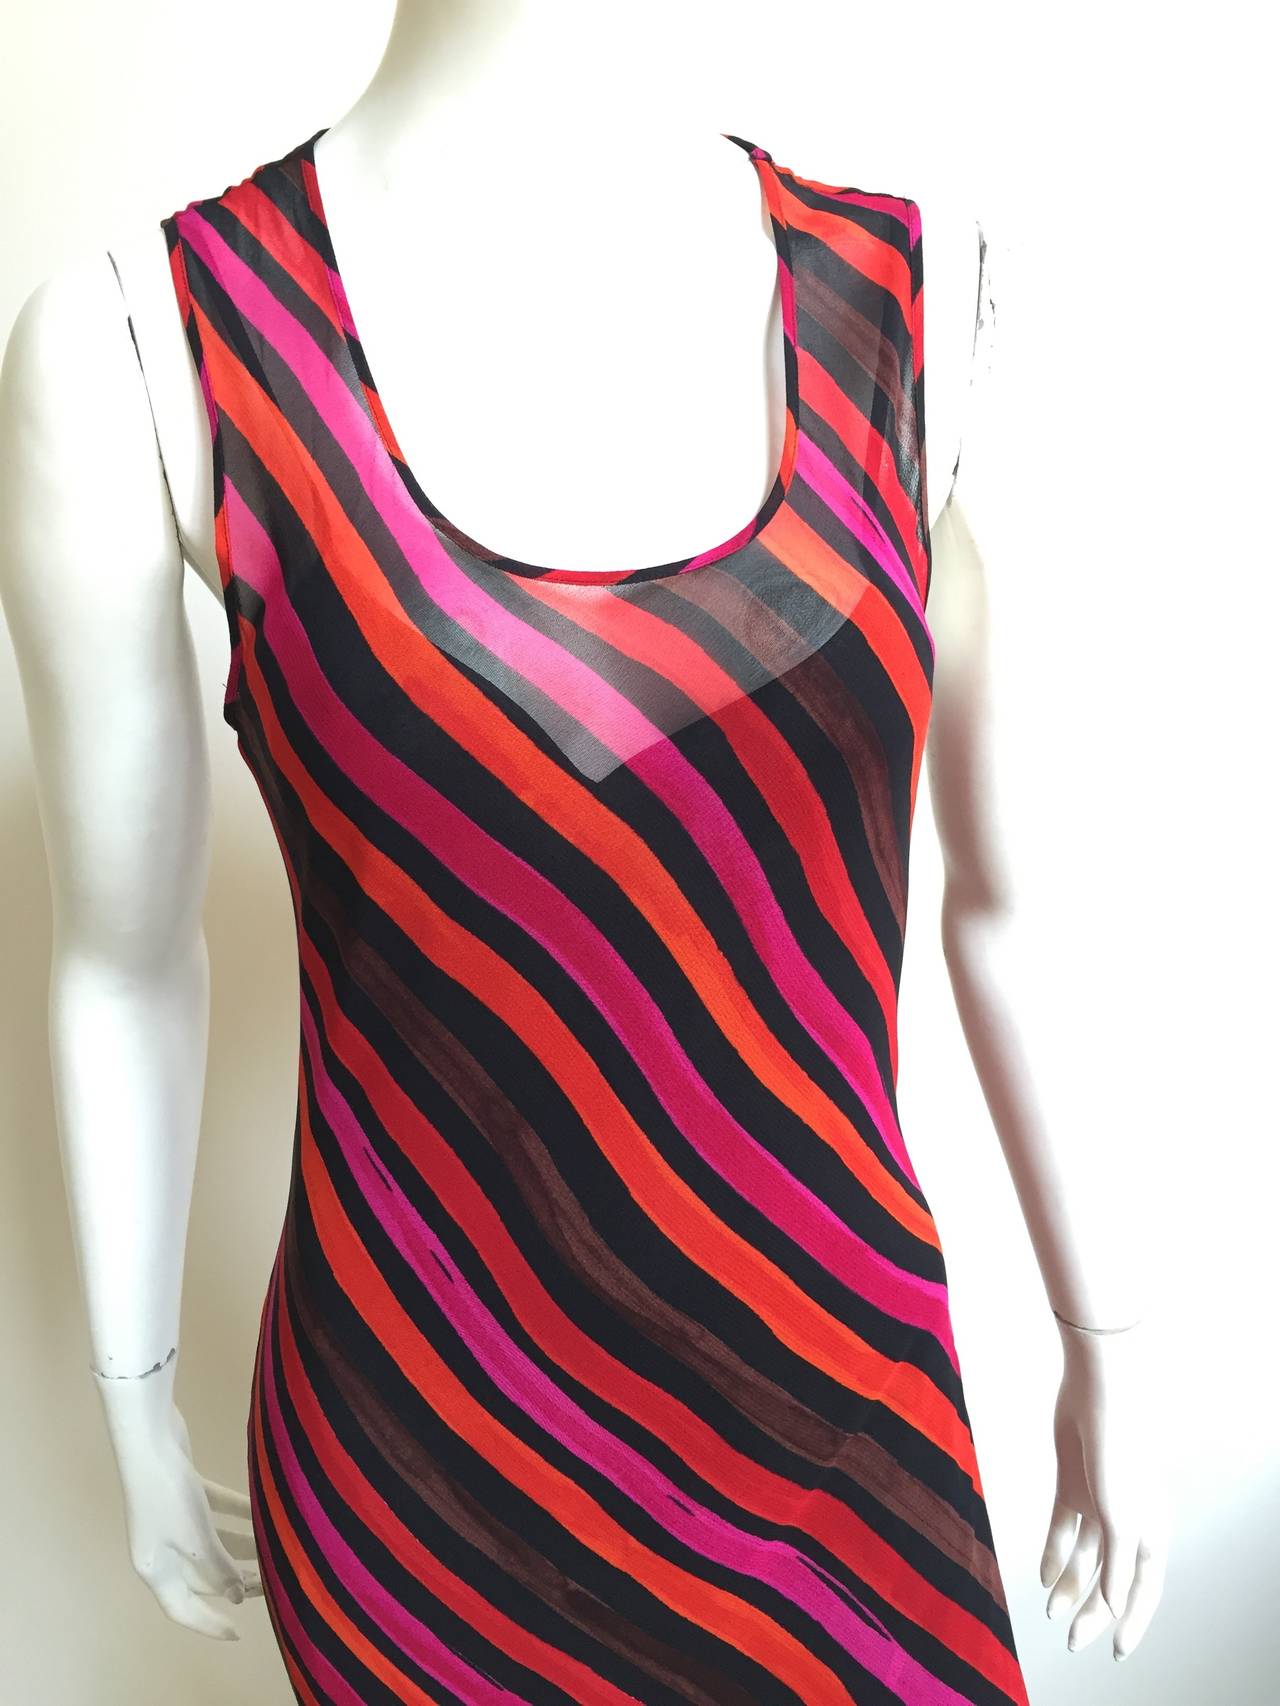 Sonia Rykiel 1980s striped dress with under slip is an original French size 40 but fits like a modern USA size 4 / 6 ( Please see & use the measurements I provide you to make sure this fits your lovely body). Sexy and clingy dress fit for any